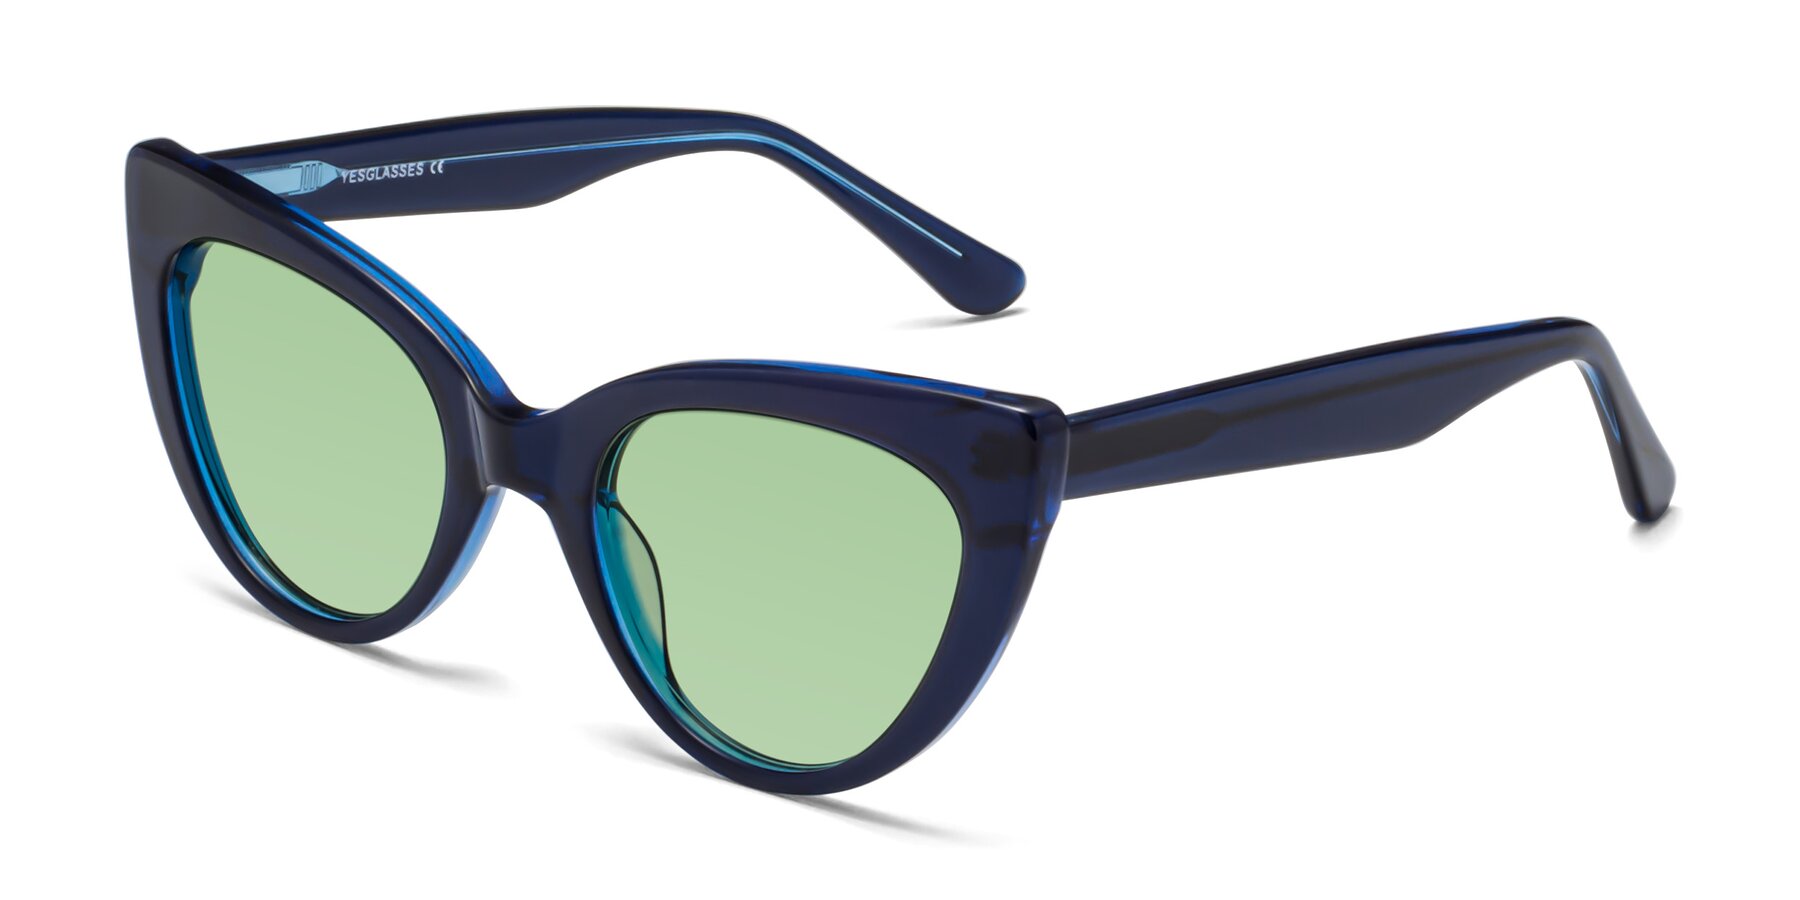 Angle of Tiesi in Midnight Blue with Medium Green Tinted Lenses